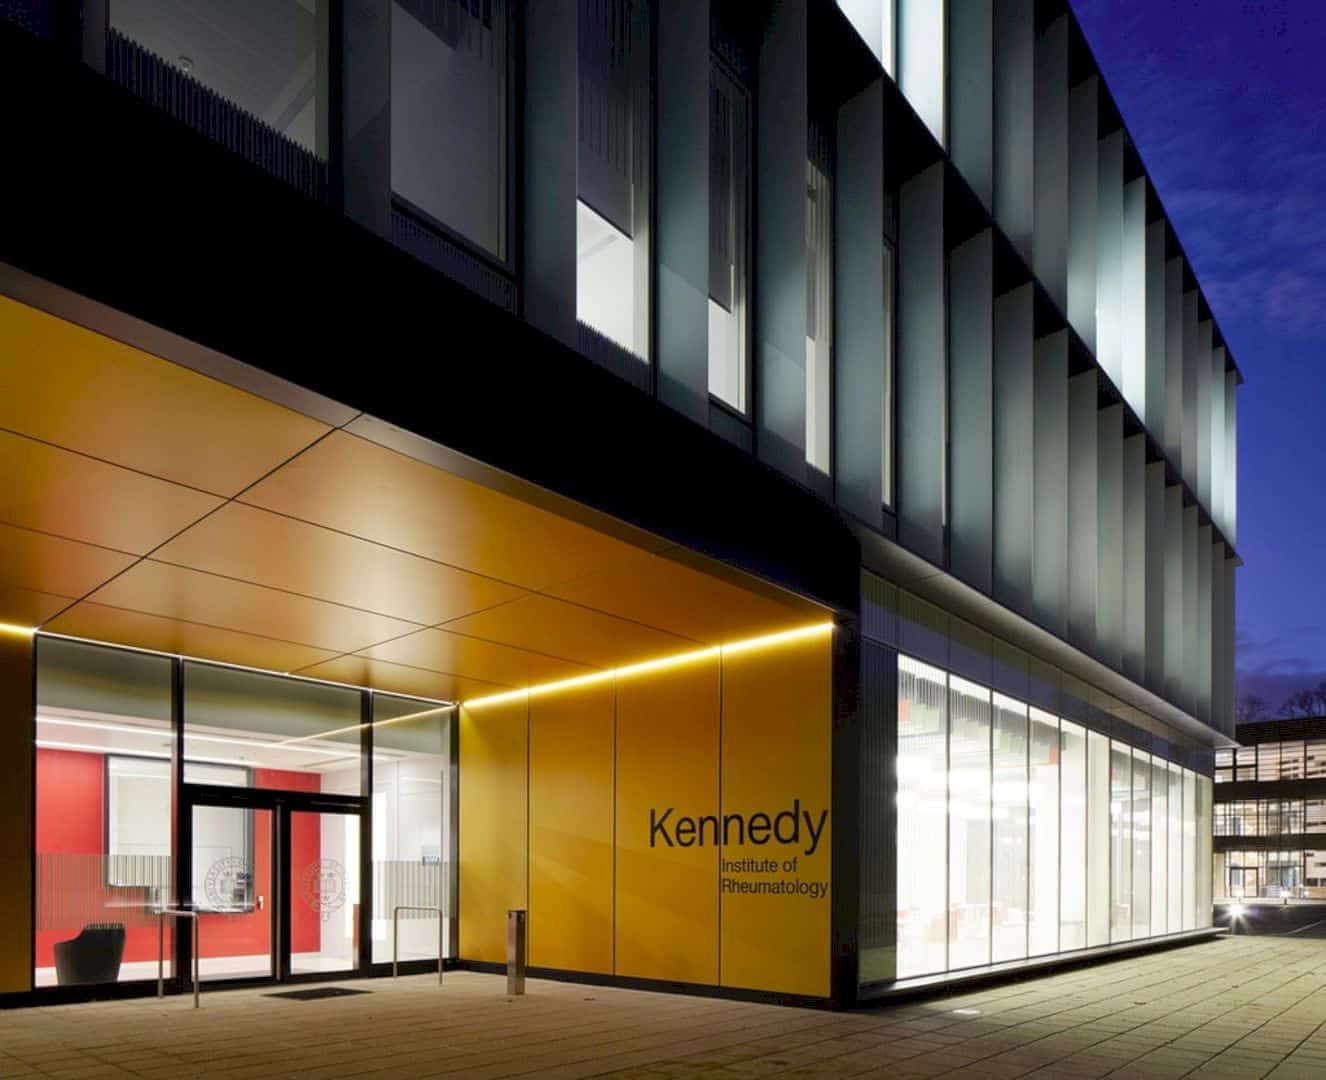 The Kennedy Institute Of Rheumatology A New Unique Home For An International Research Center Of Inflammatory Sciences 7